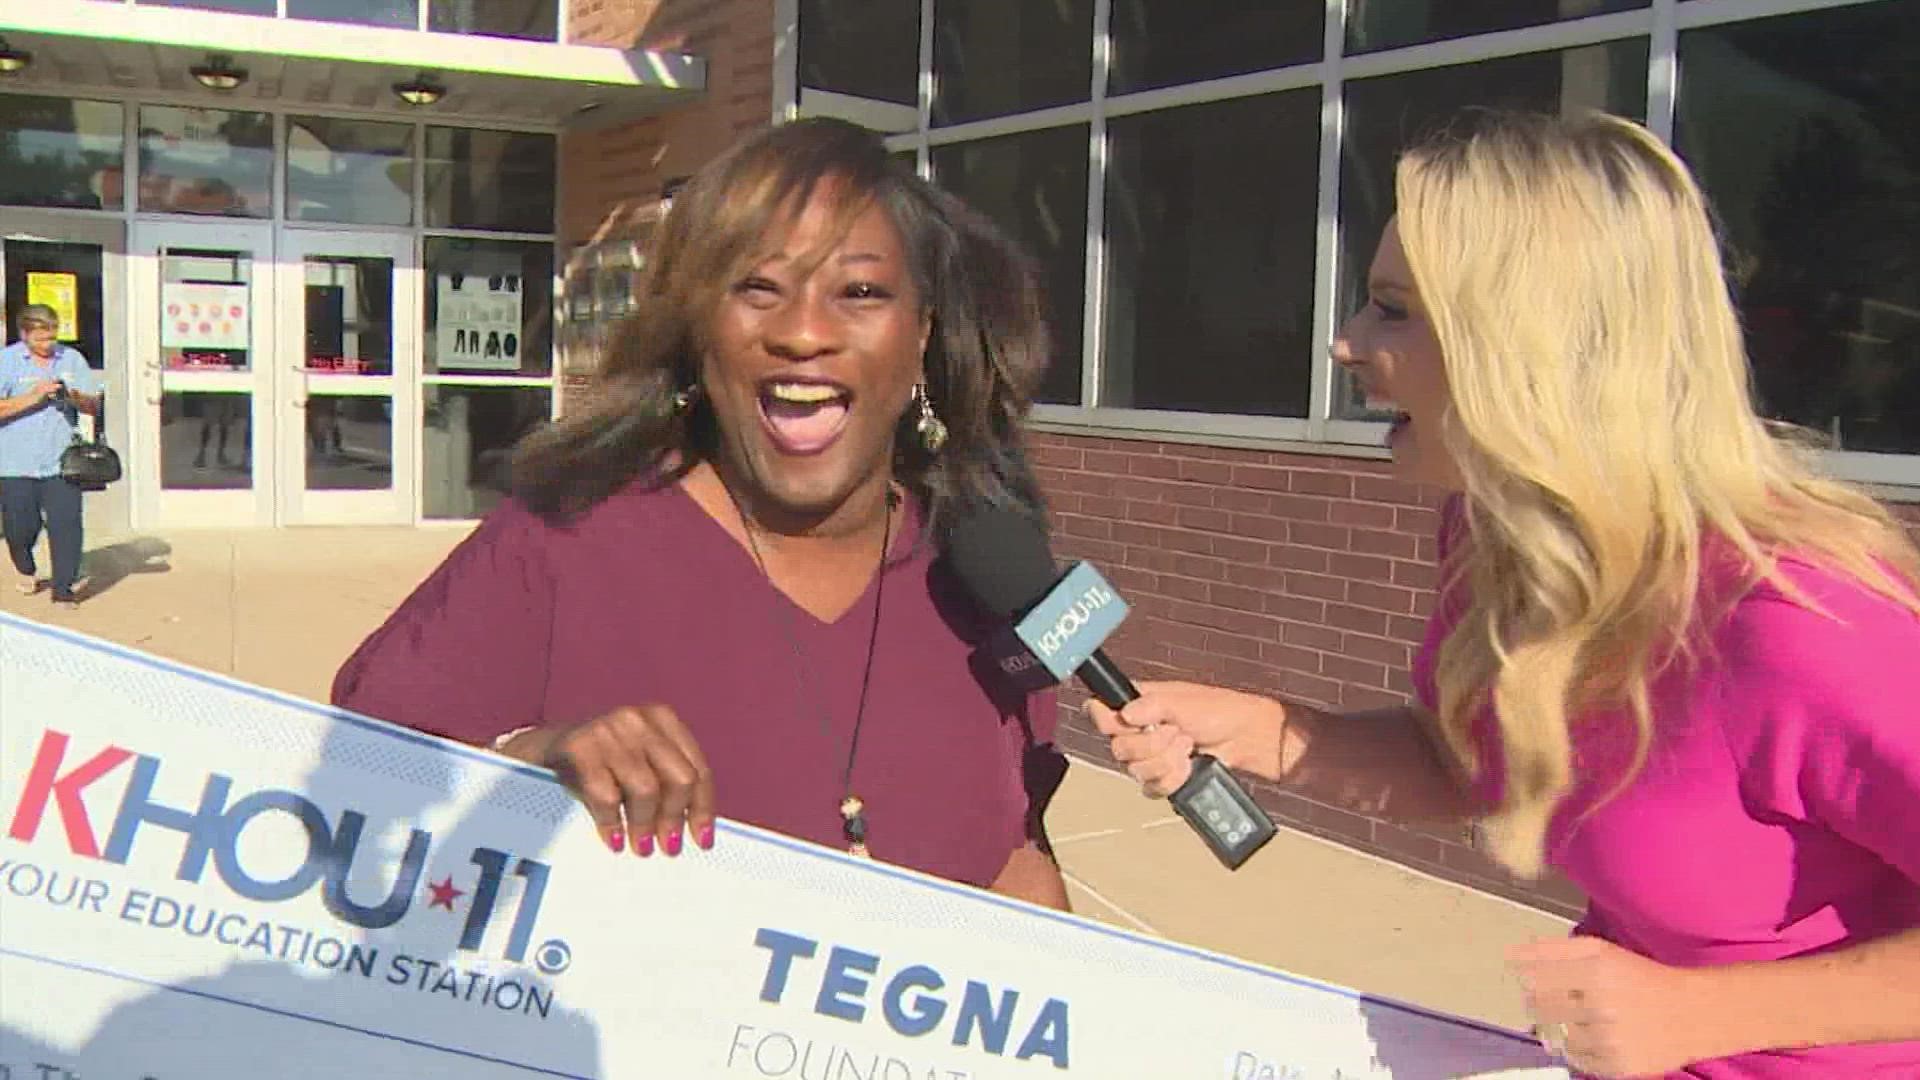 Chita surprised the principal of Walnut Bend Elementary with an $11,000 grant from KHOU 11 and the TEGNA Foundation. It's part of our Education Station initiative.